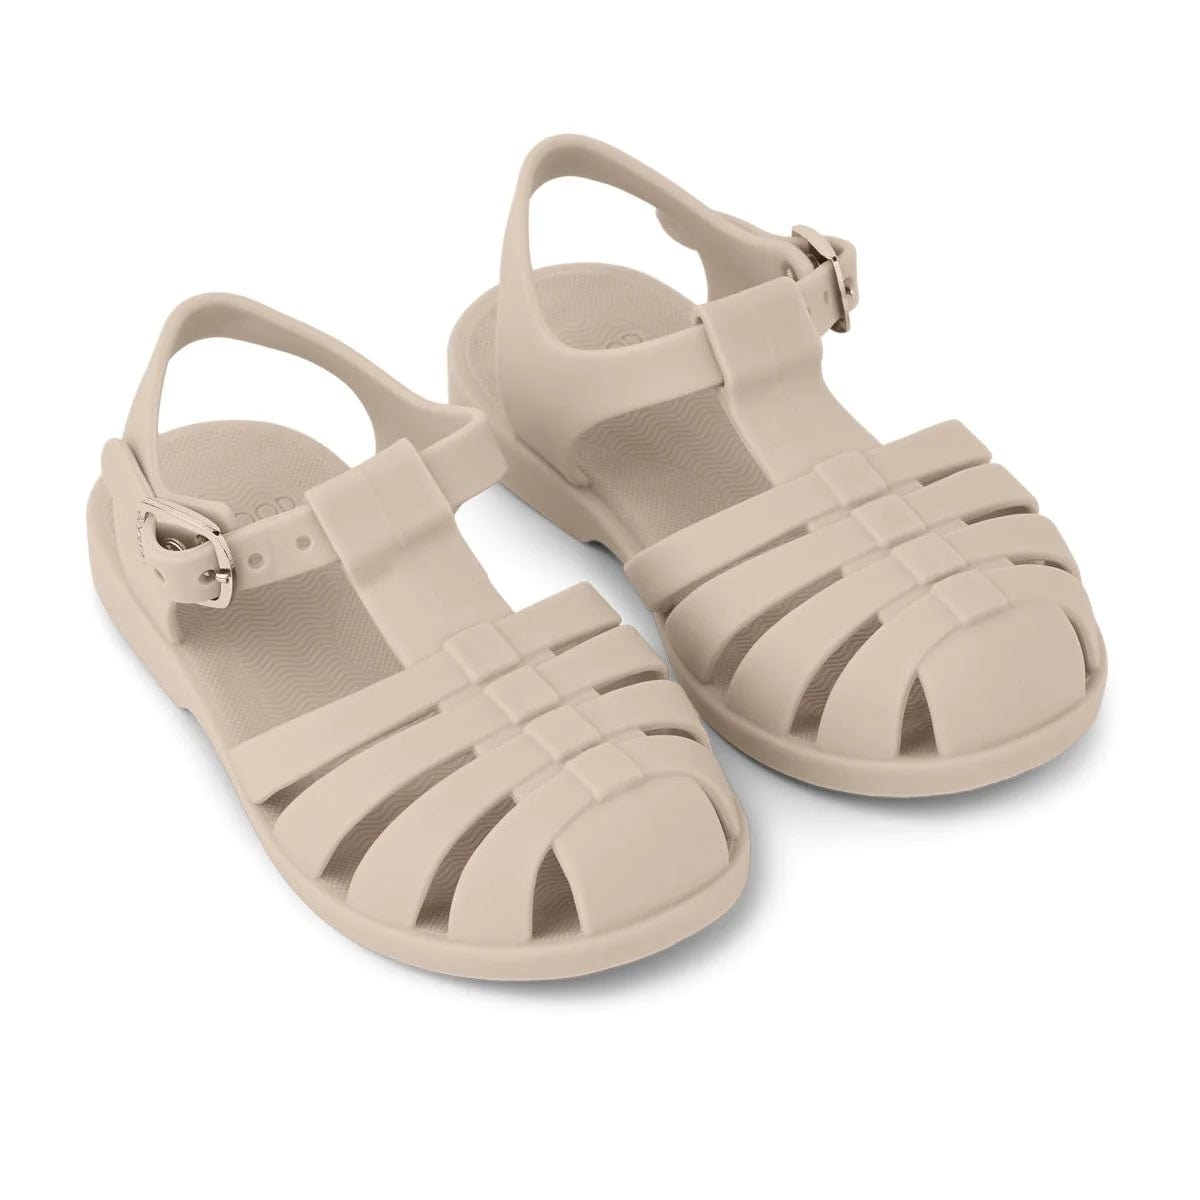 Liewood Jelly Sandals Liewood Bre Jelly Sandals (Sandy)